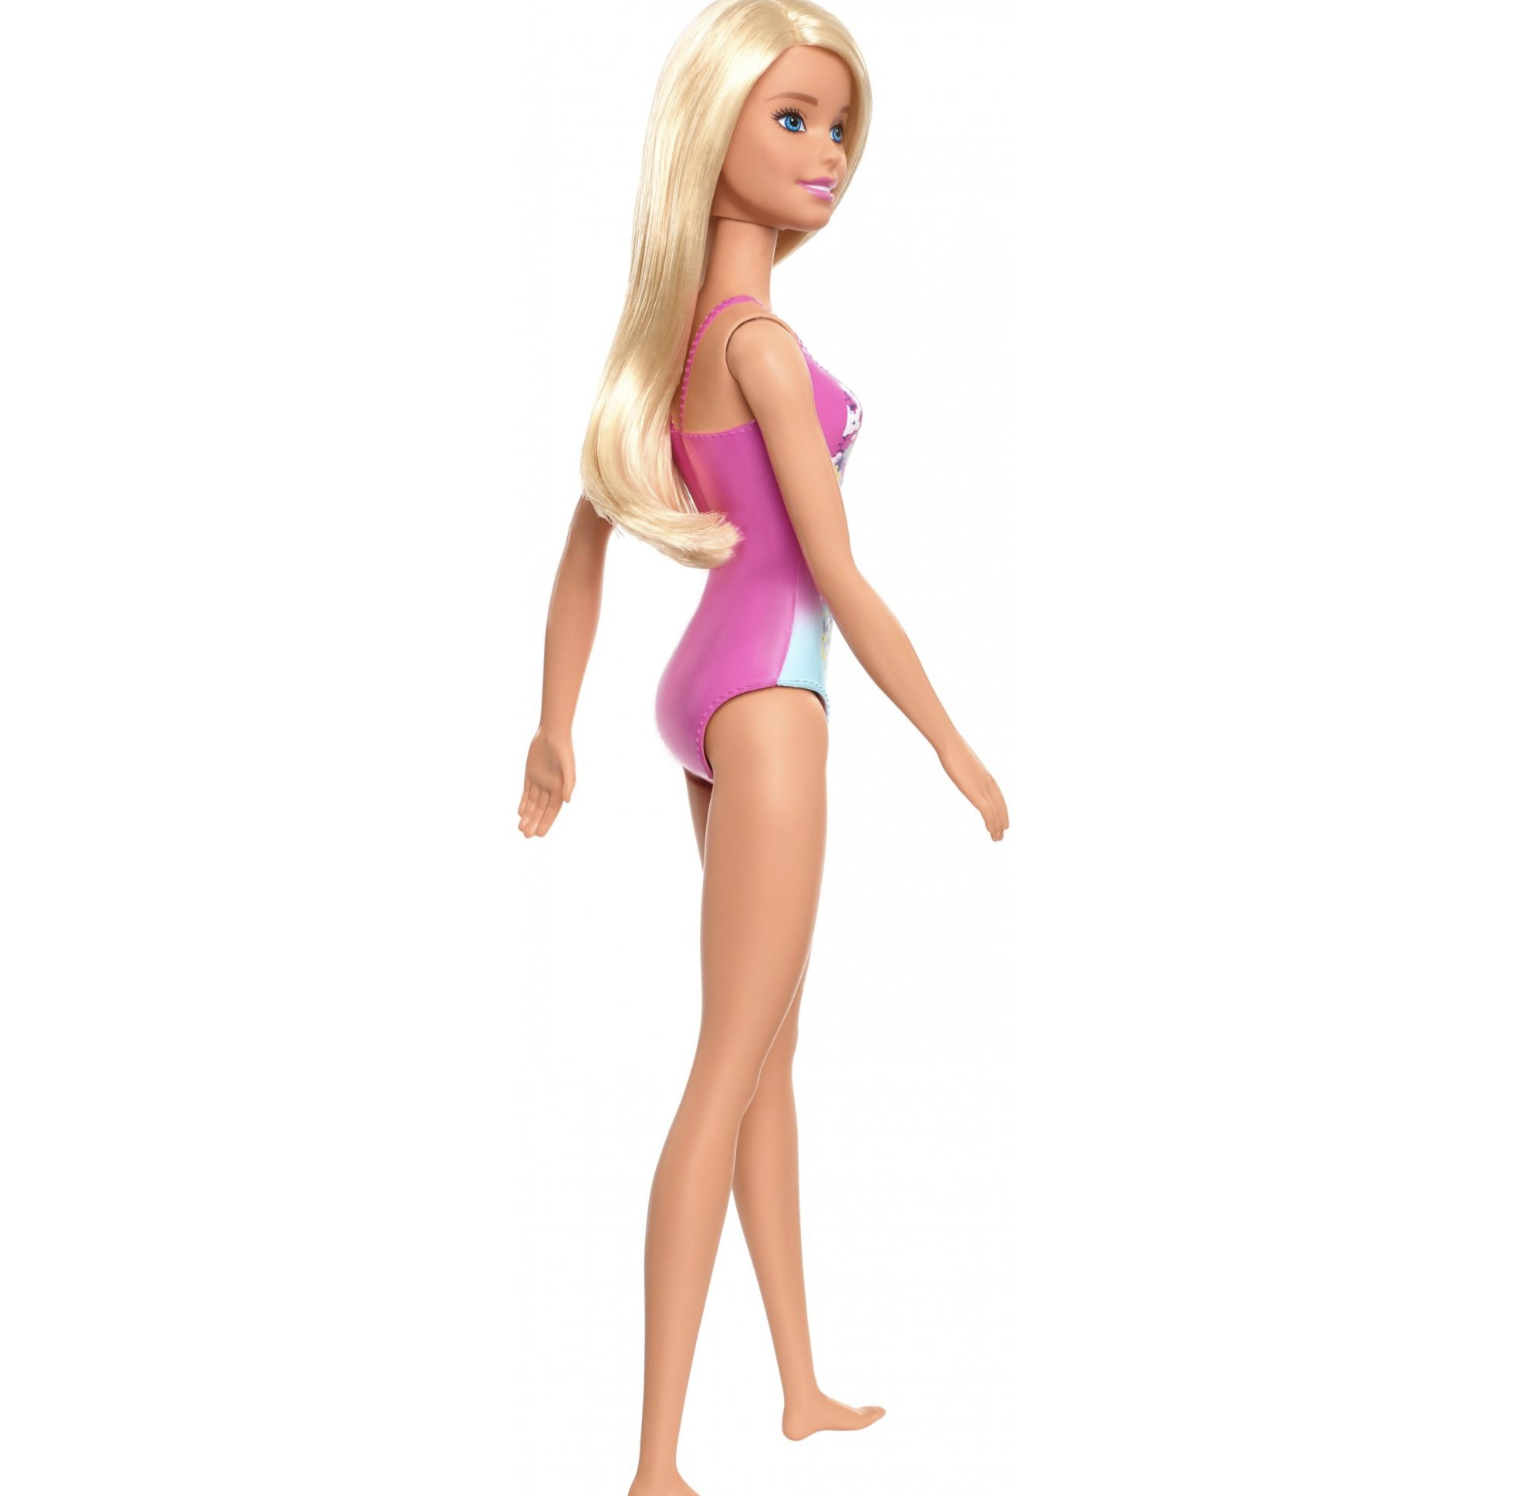 Barbie Beach Doll - Pink and Blue Floral One-Piece Swimsuit, Blonde